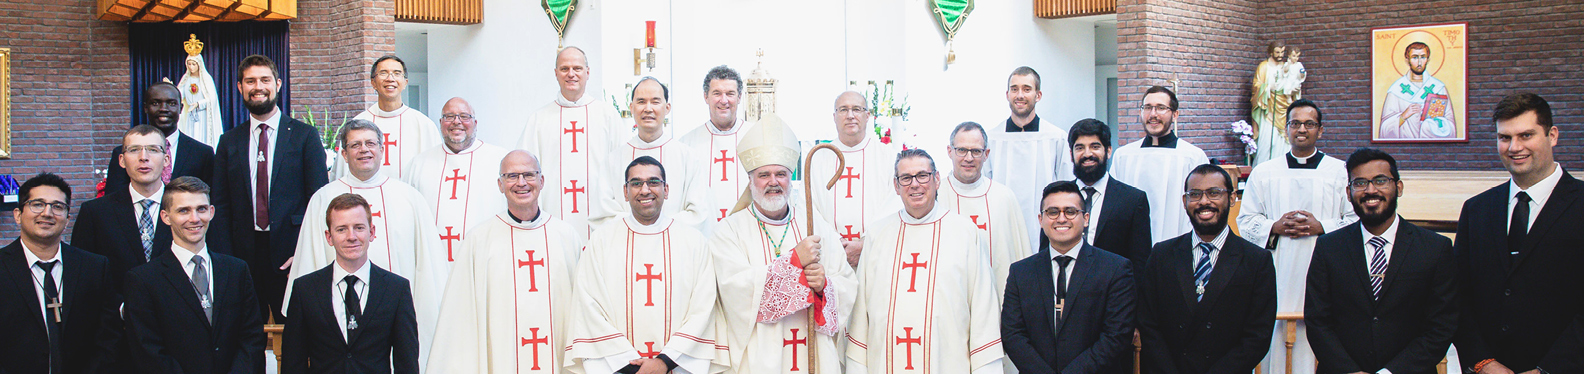 Companion of the Cross-Ordination of Brenton to Diaconate at St Timothys